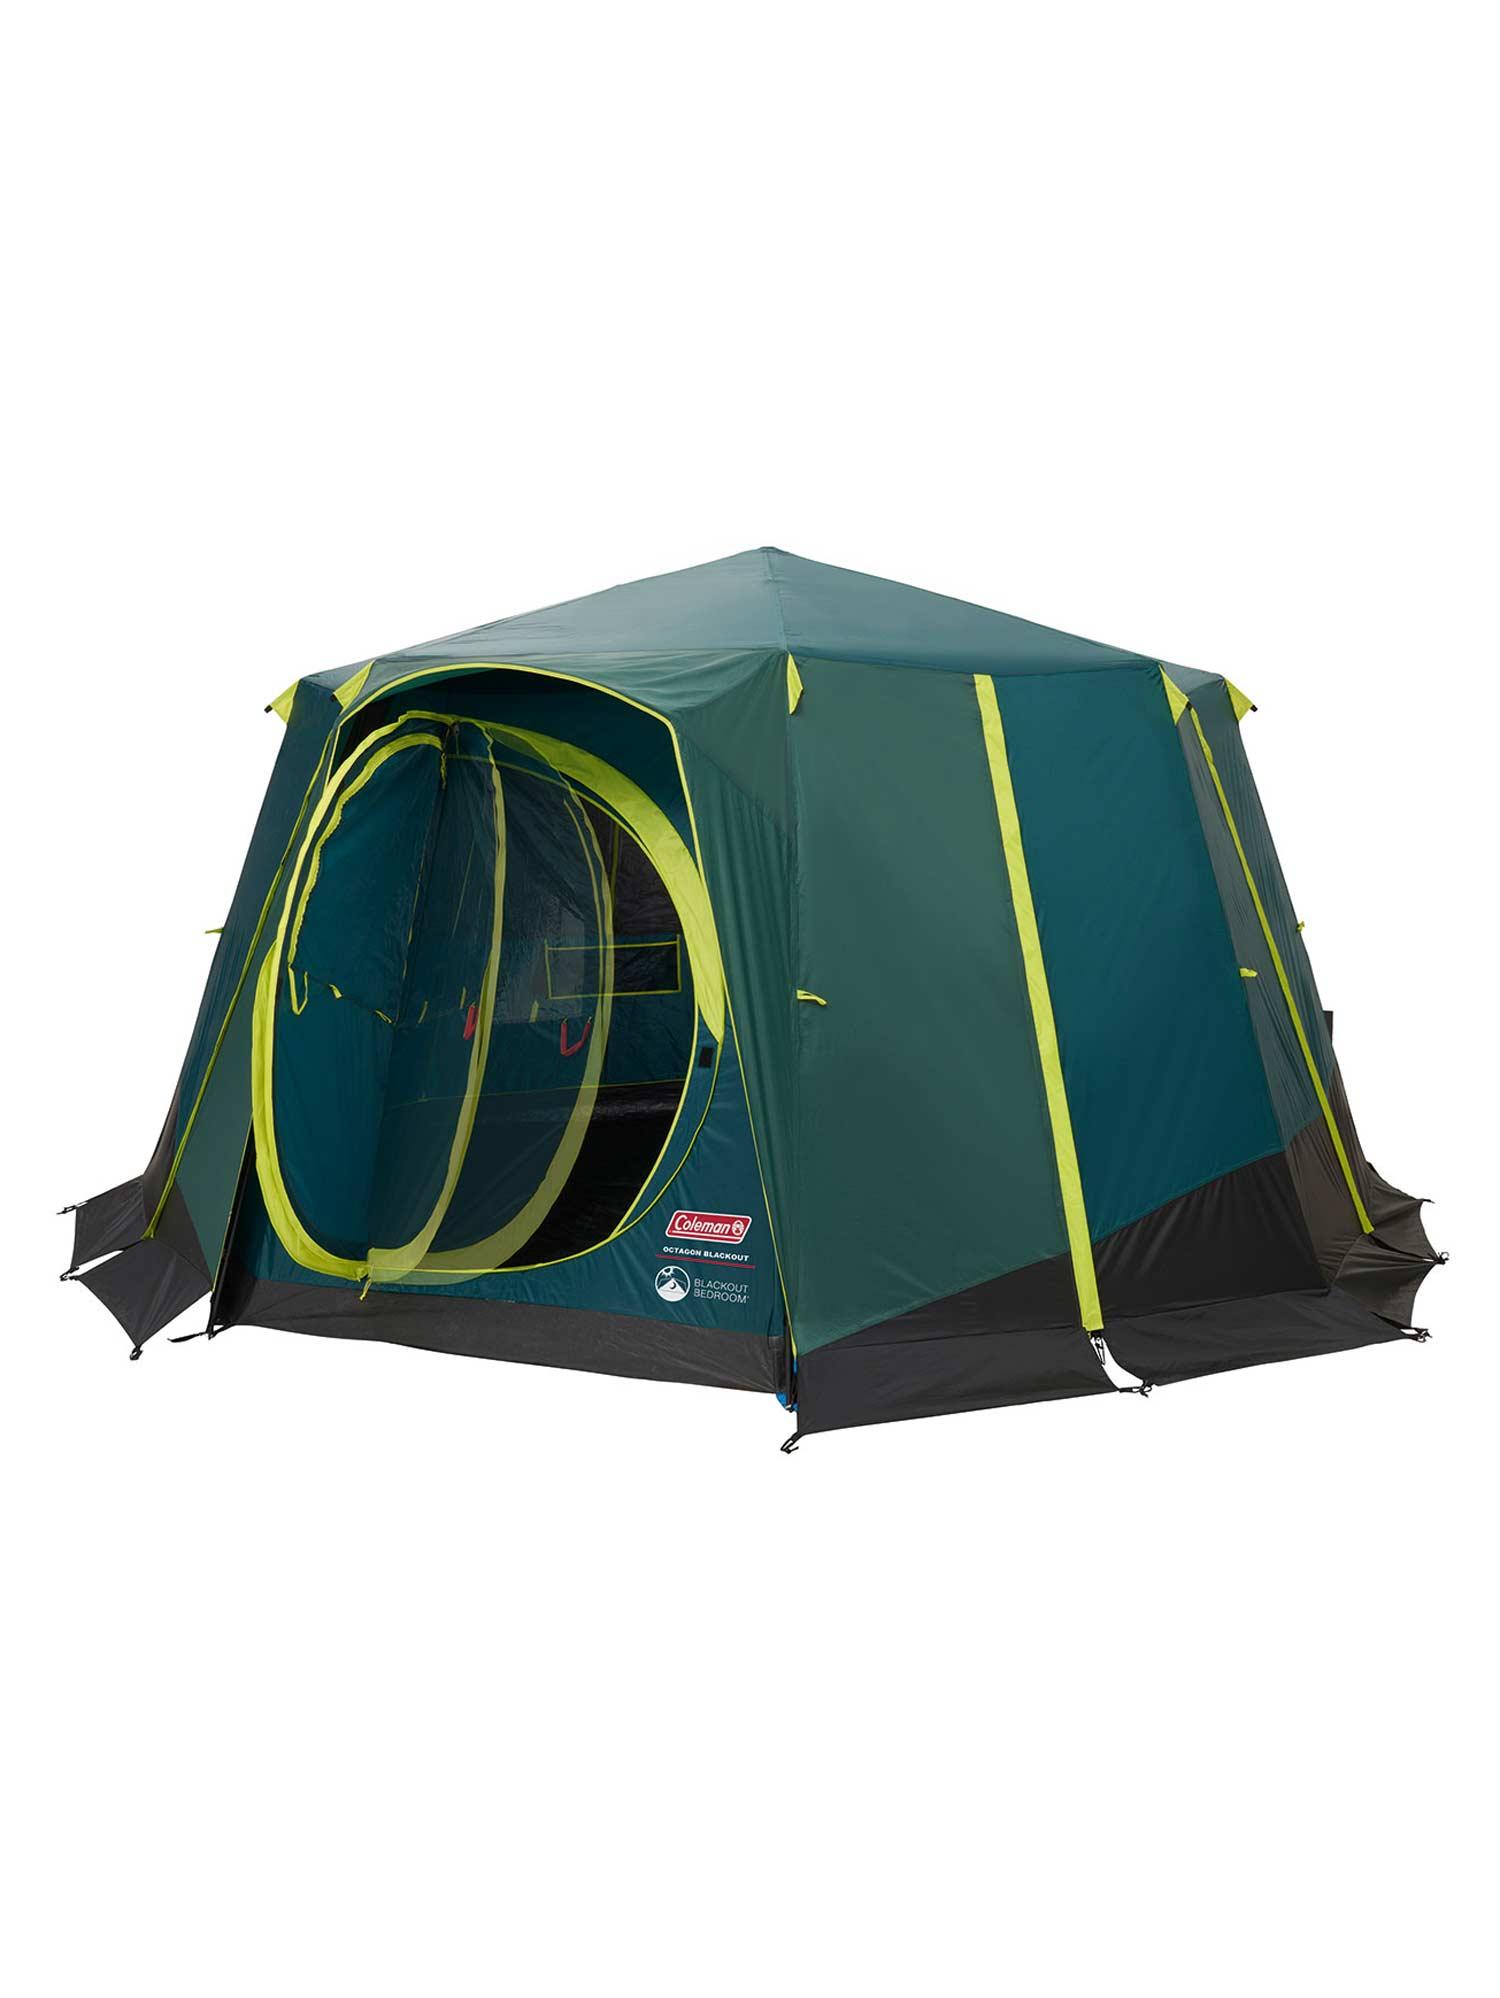 Selected image for COLEMAN Šator OCTAGON OUT BEDROOM Tent plava